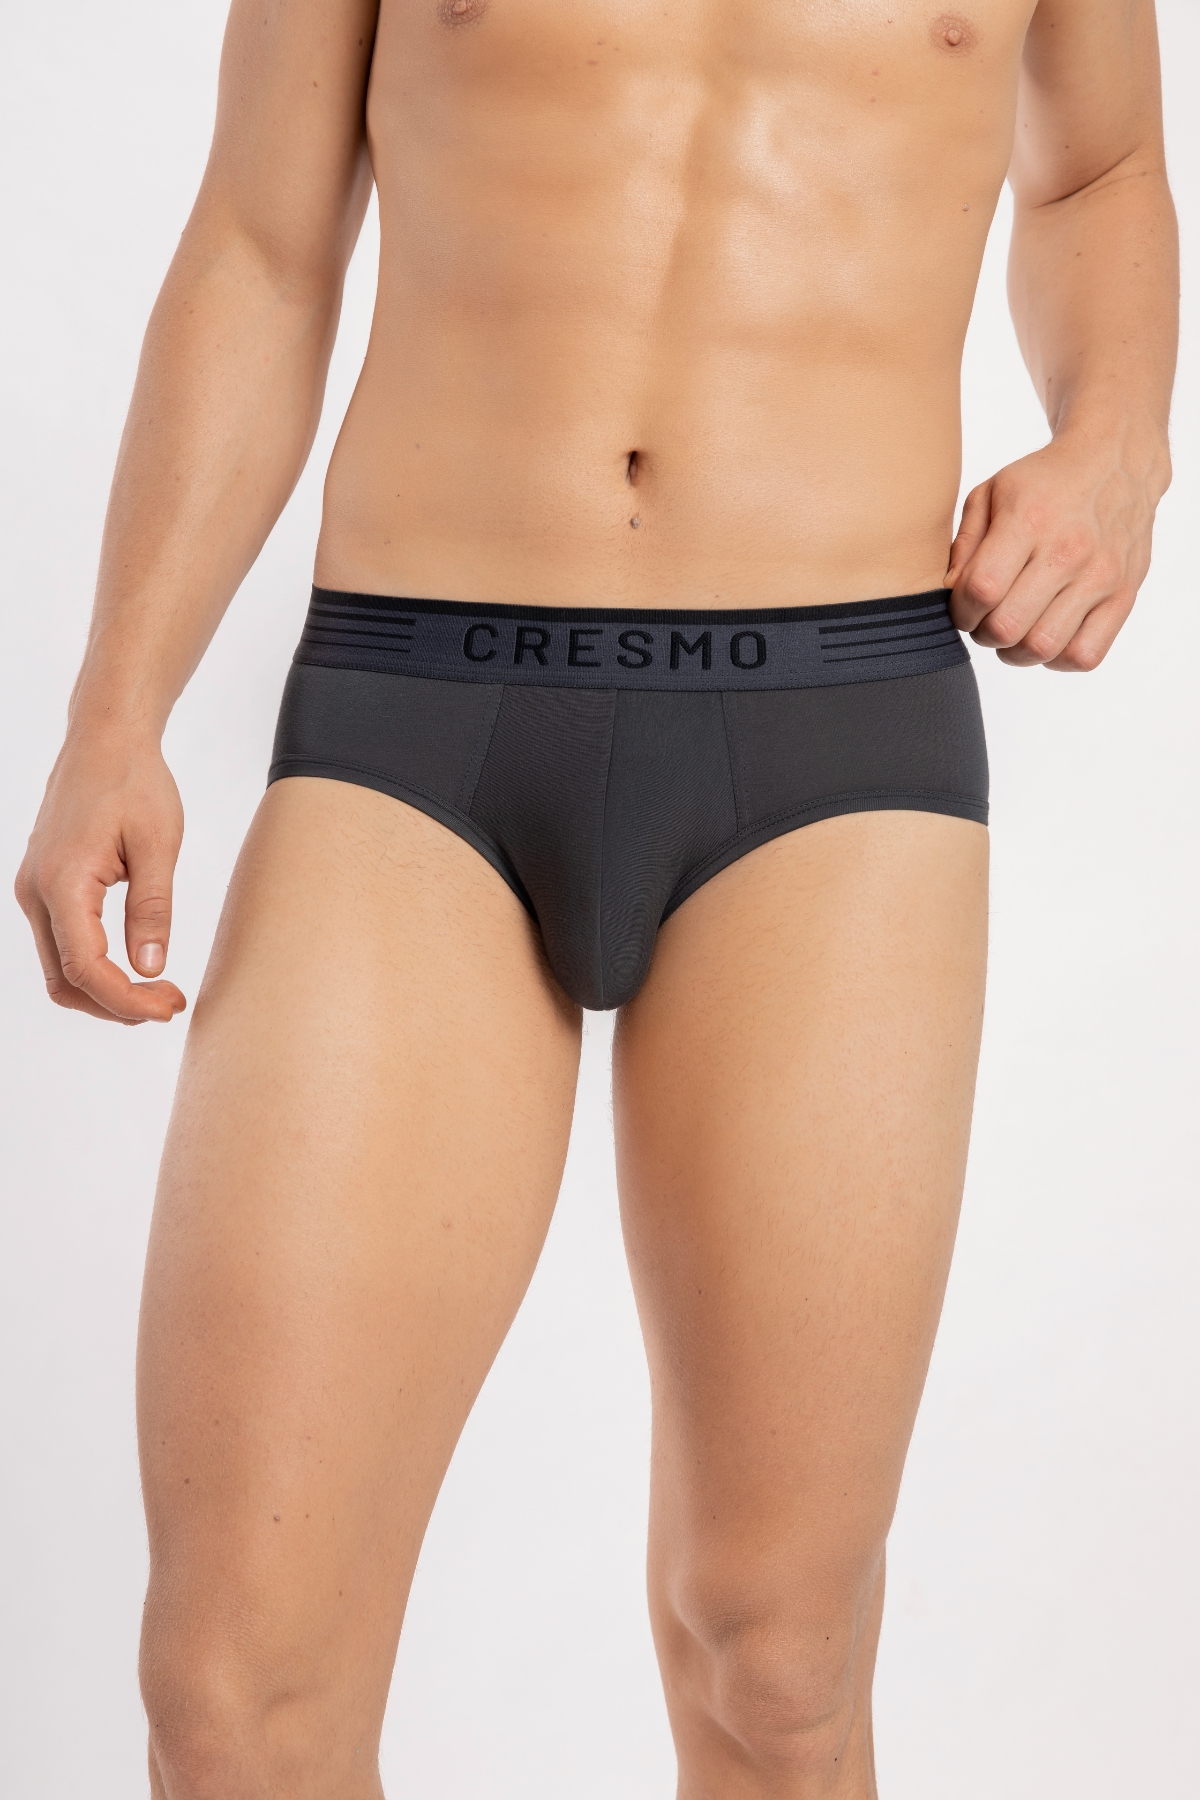 CRESMO | CRESMO Men's Anti-Microbial Micro Modal Underwear Breathable Ultra Soft Comfort Lightweight Brief (Pack of 2) 3